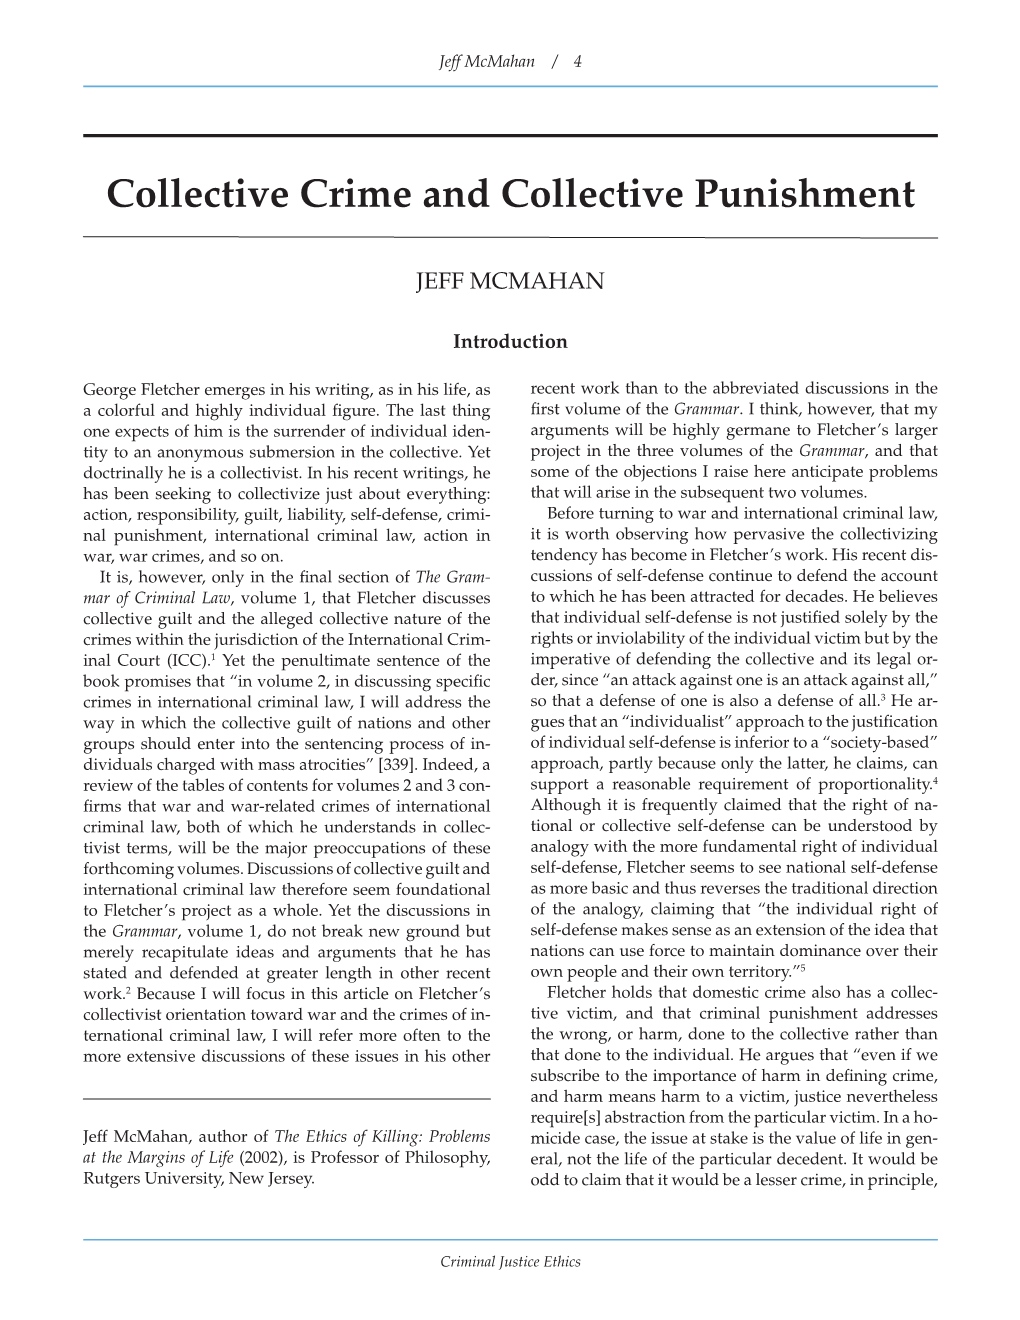 Collective Crime and Collective Punishment